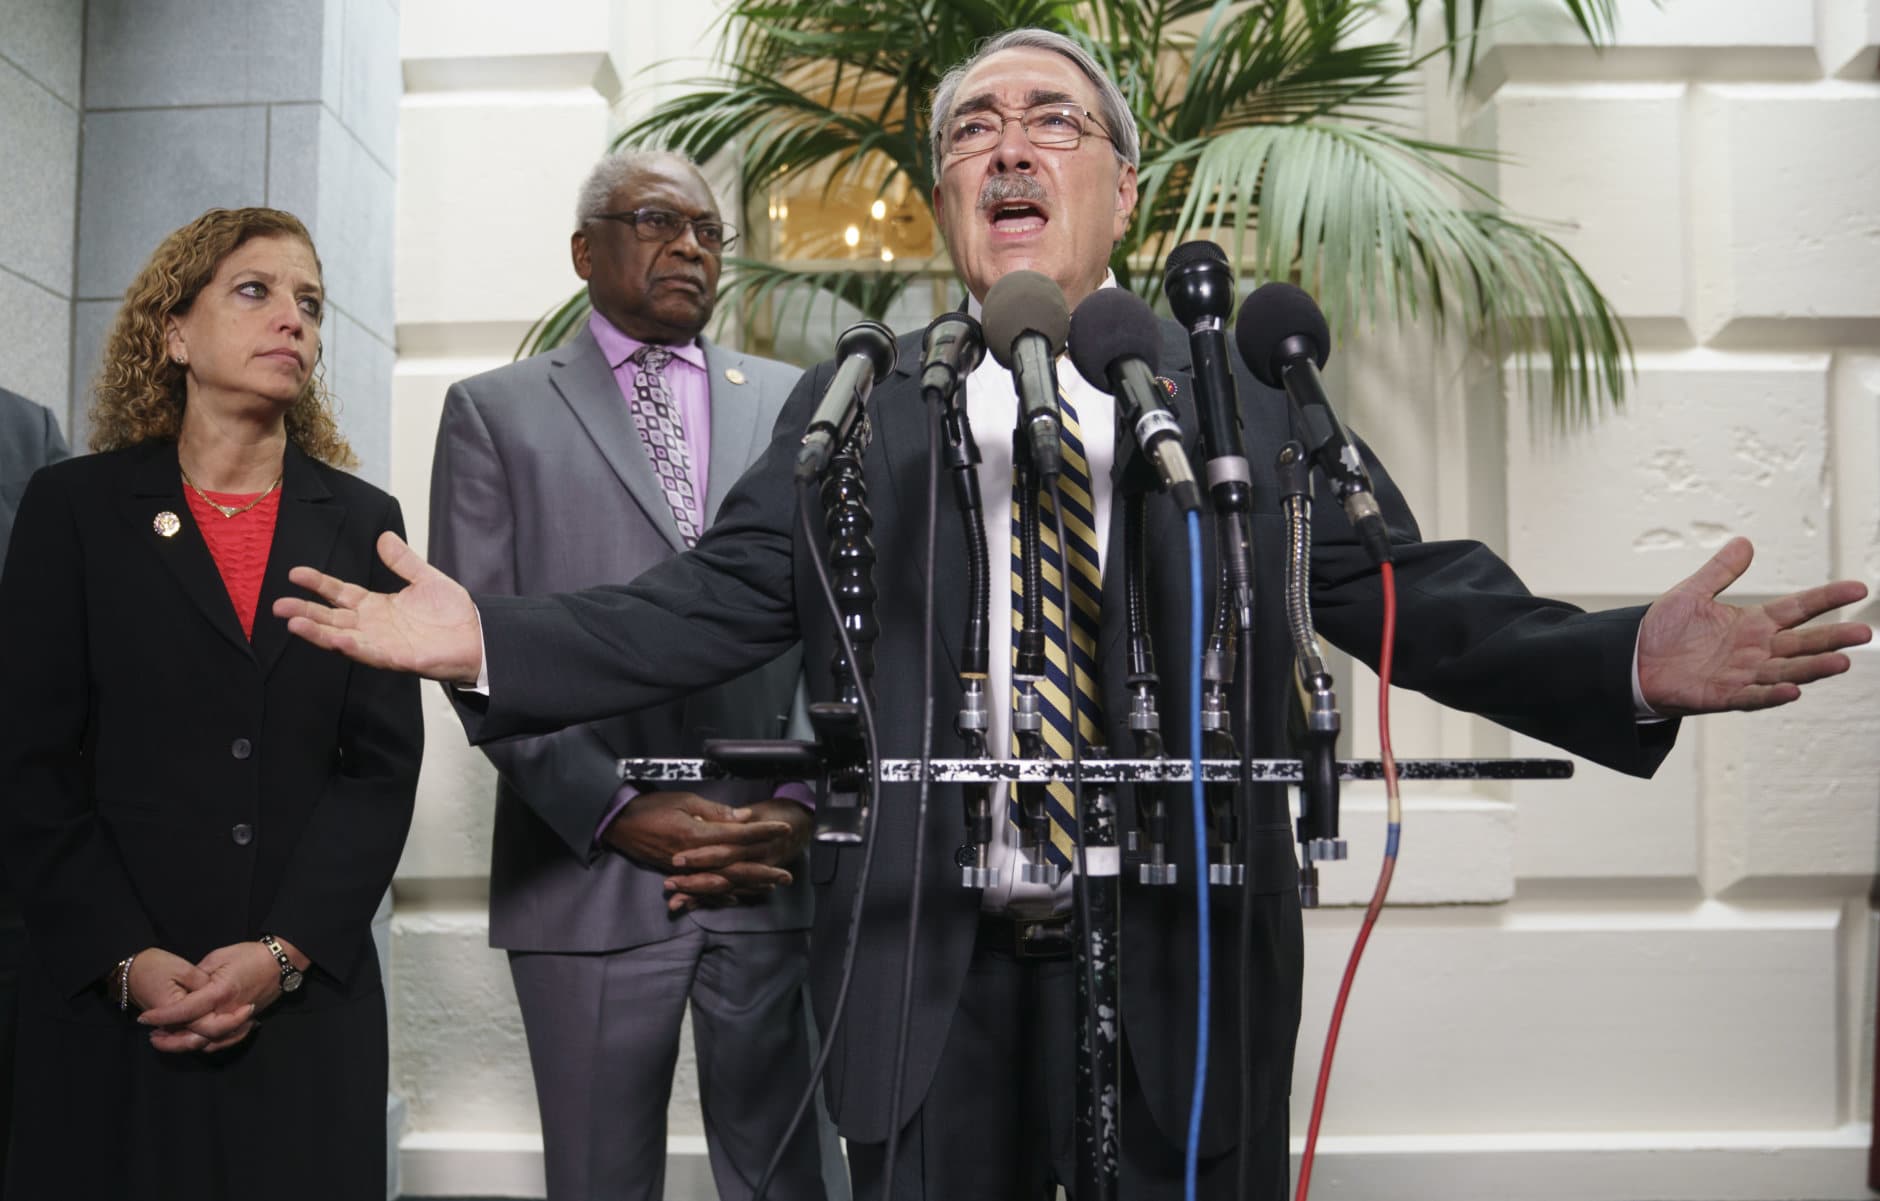 Rep. G.K. Butterfield, D-N.C., joined by House Majority Whip James Clyburn, D-S.C., center, and Rep. Debbie Wasserman Schultz, D-Fla., left, speaks during a news conference on Capitol Hill in Washington, Thursday, Jan. 17, 2019, following weekly Whip meeting. (AP Photo/Carolyn Kaster)